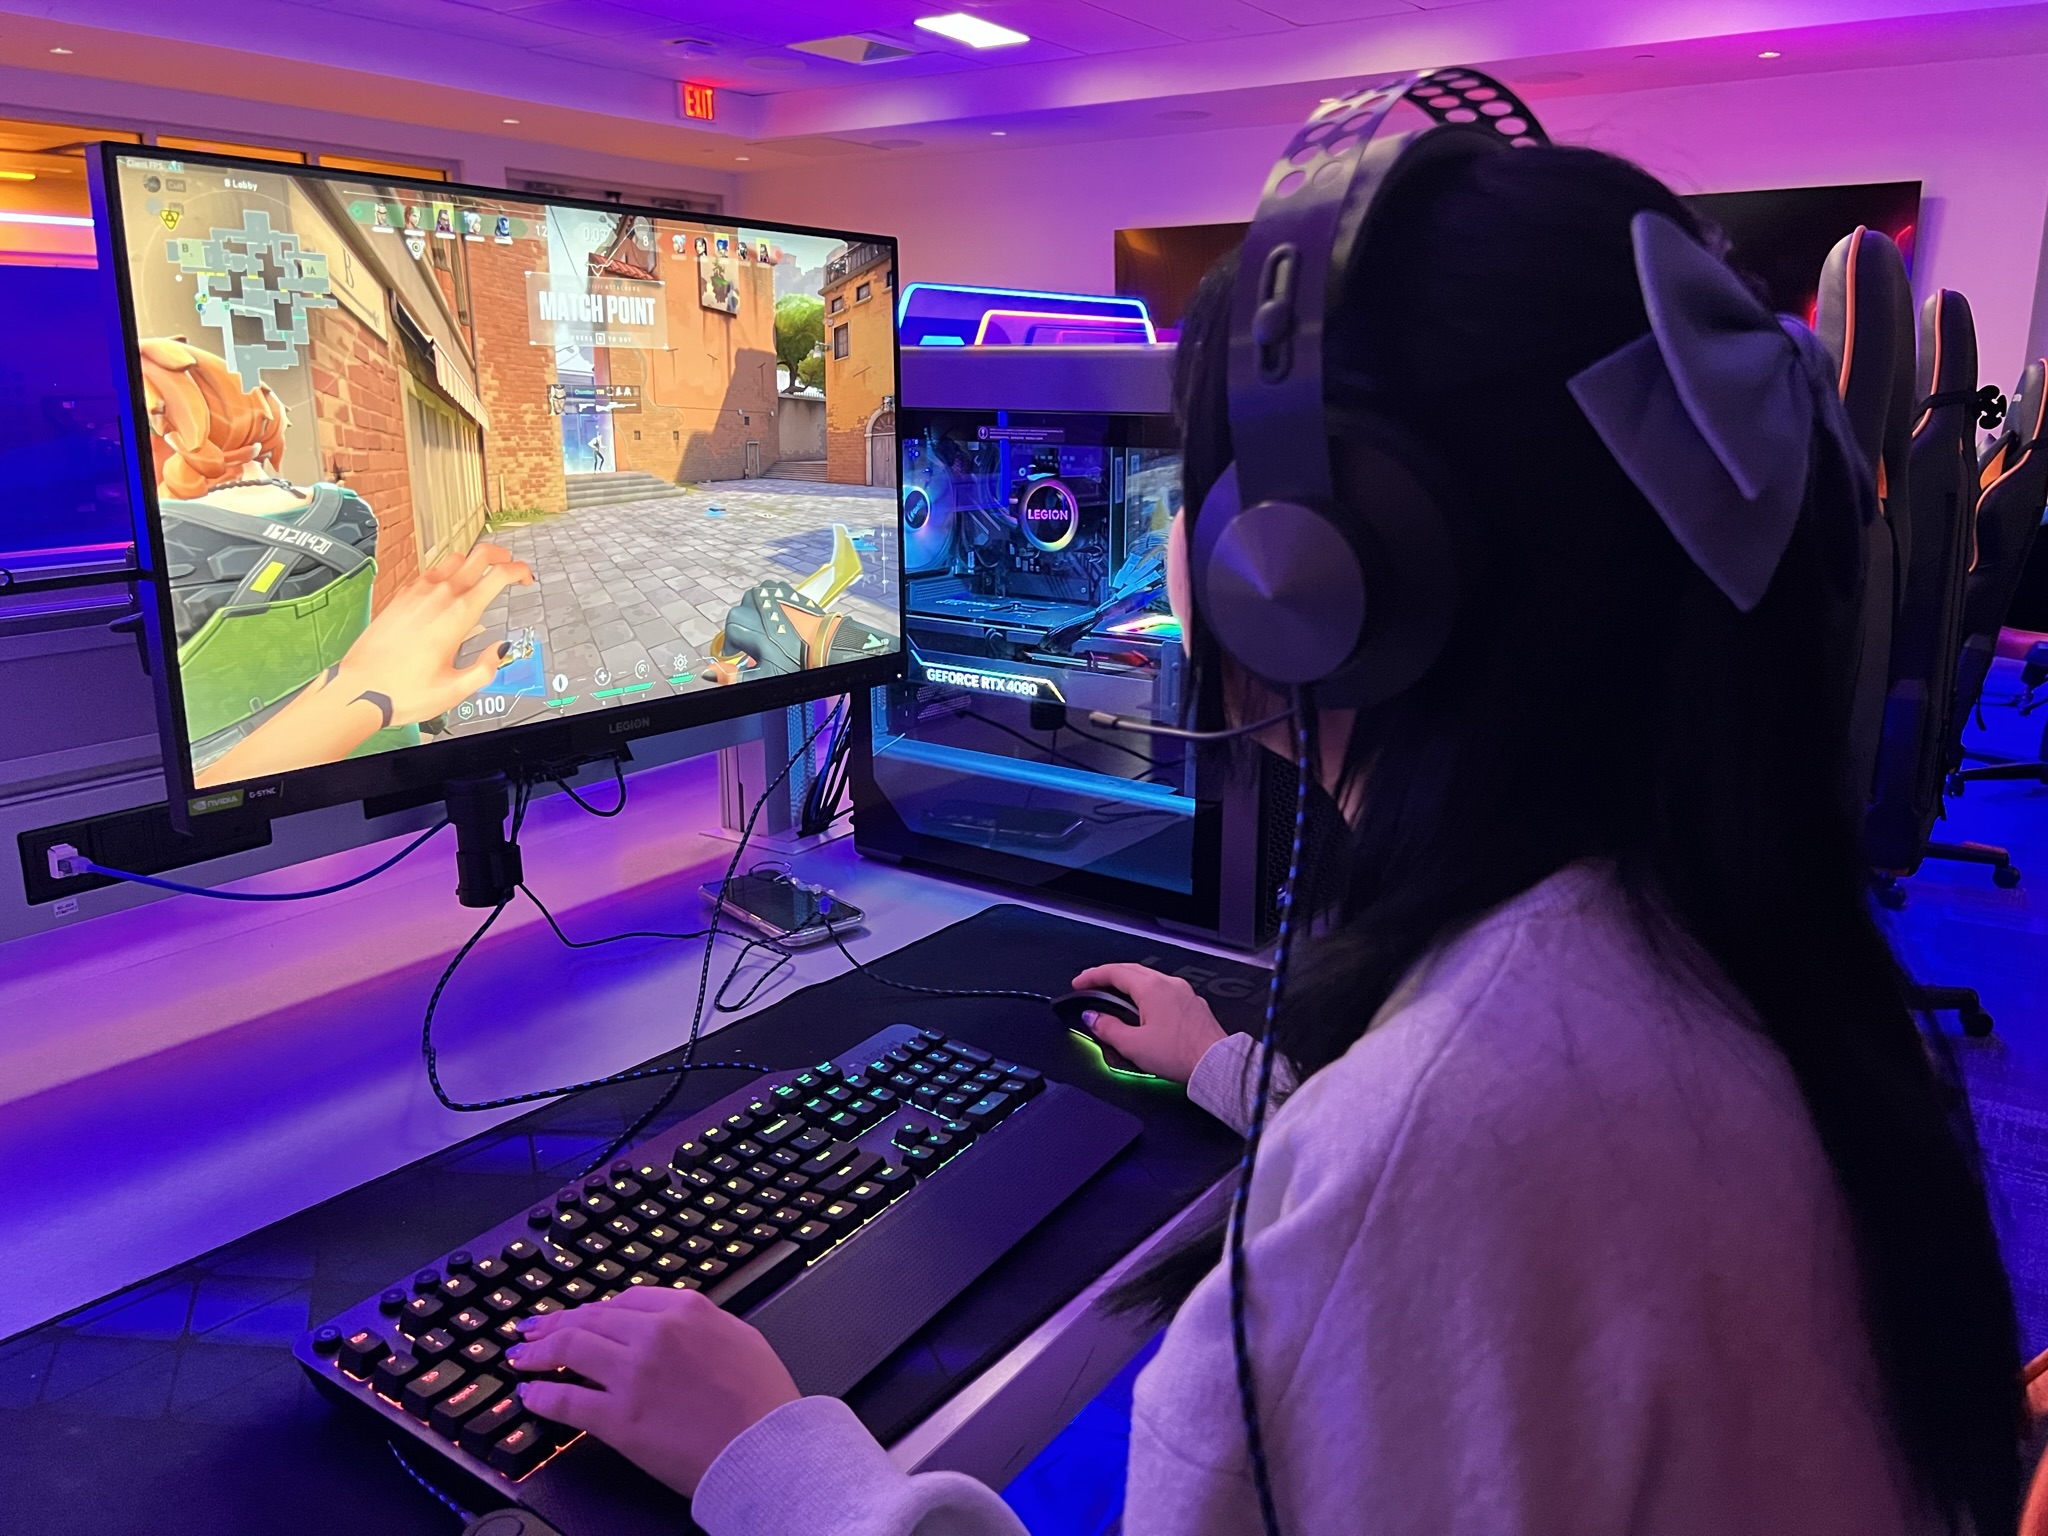 Female student plays video game on esports gaming station